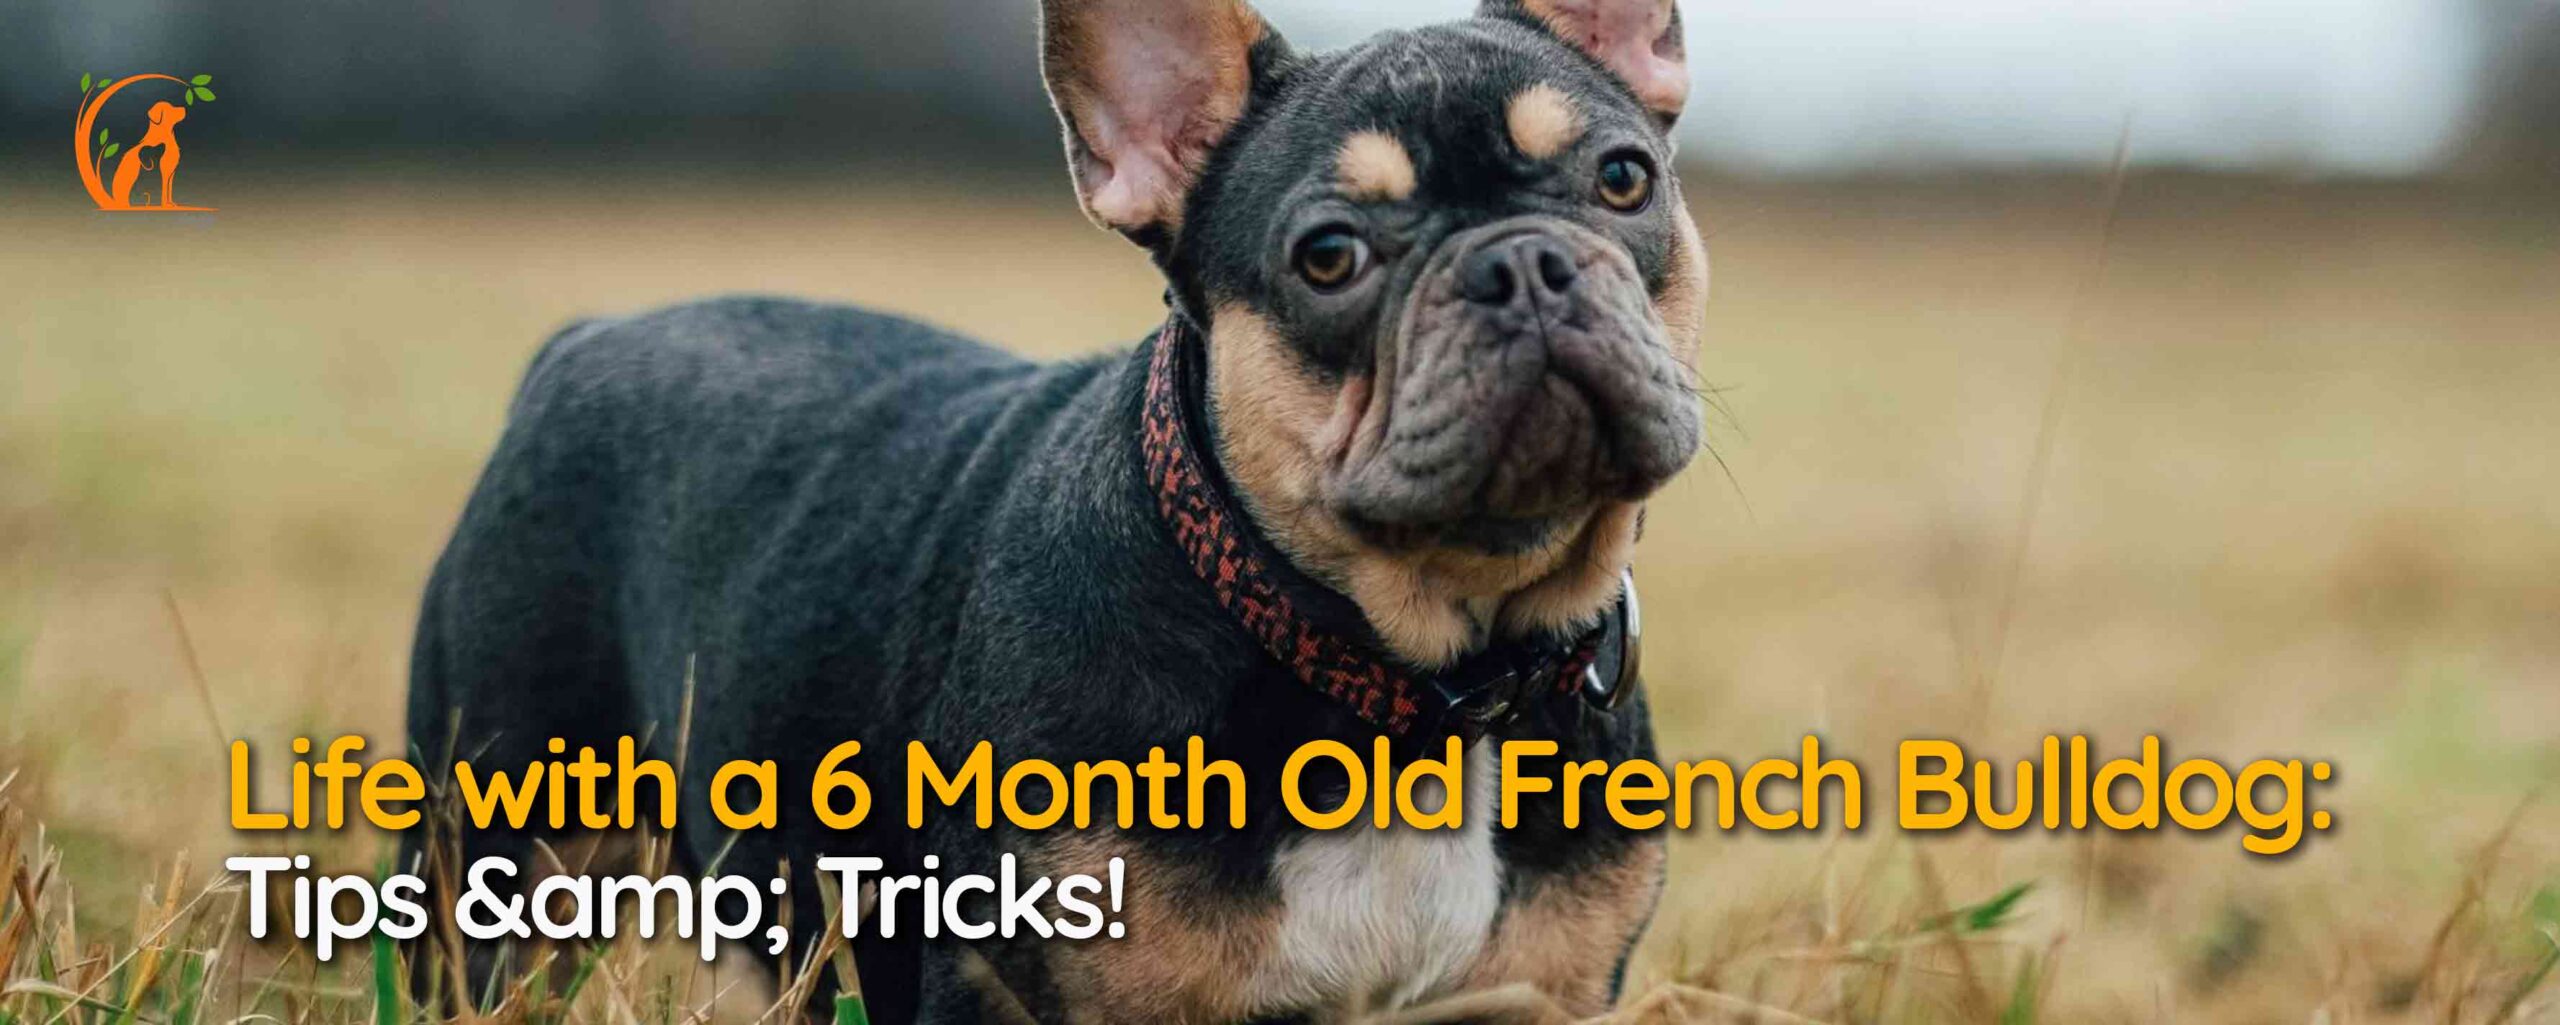 Life with a 6 Month Old French Bulldog: Tips & Tricks!